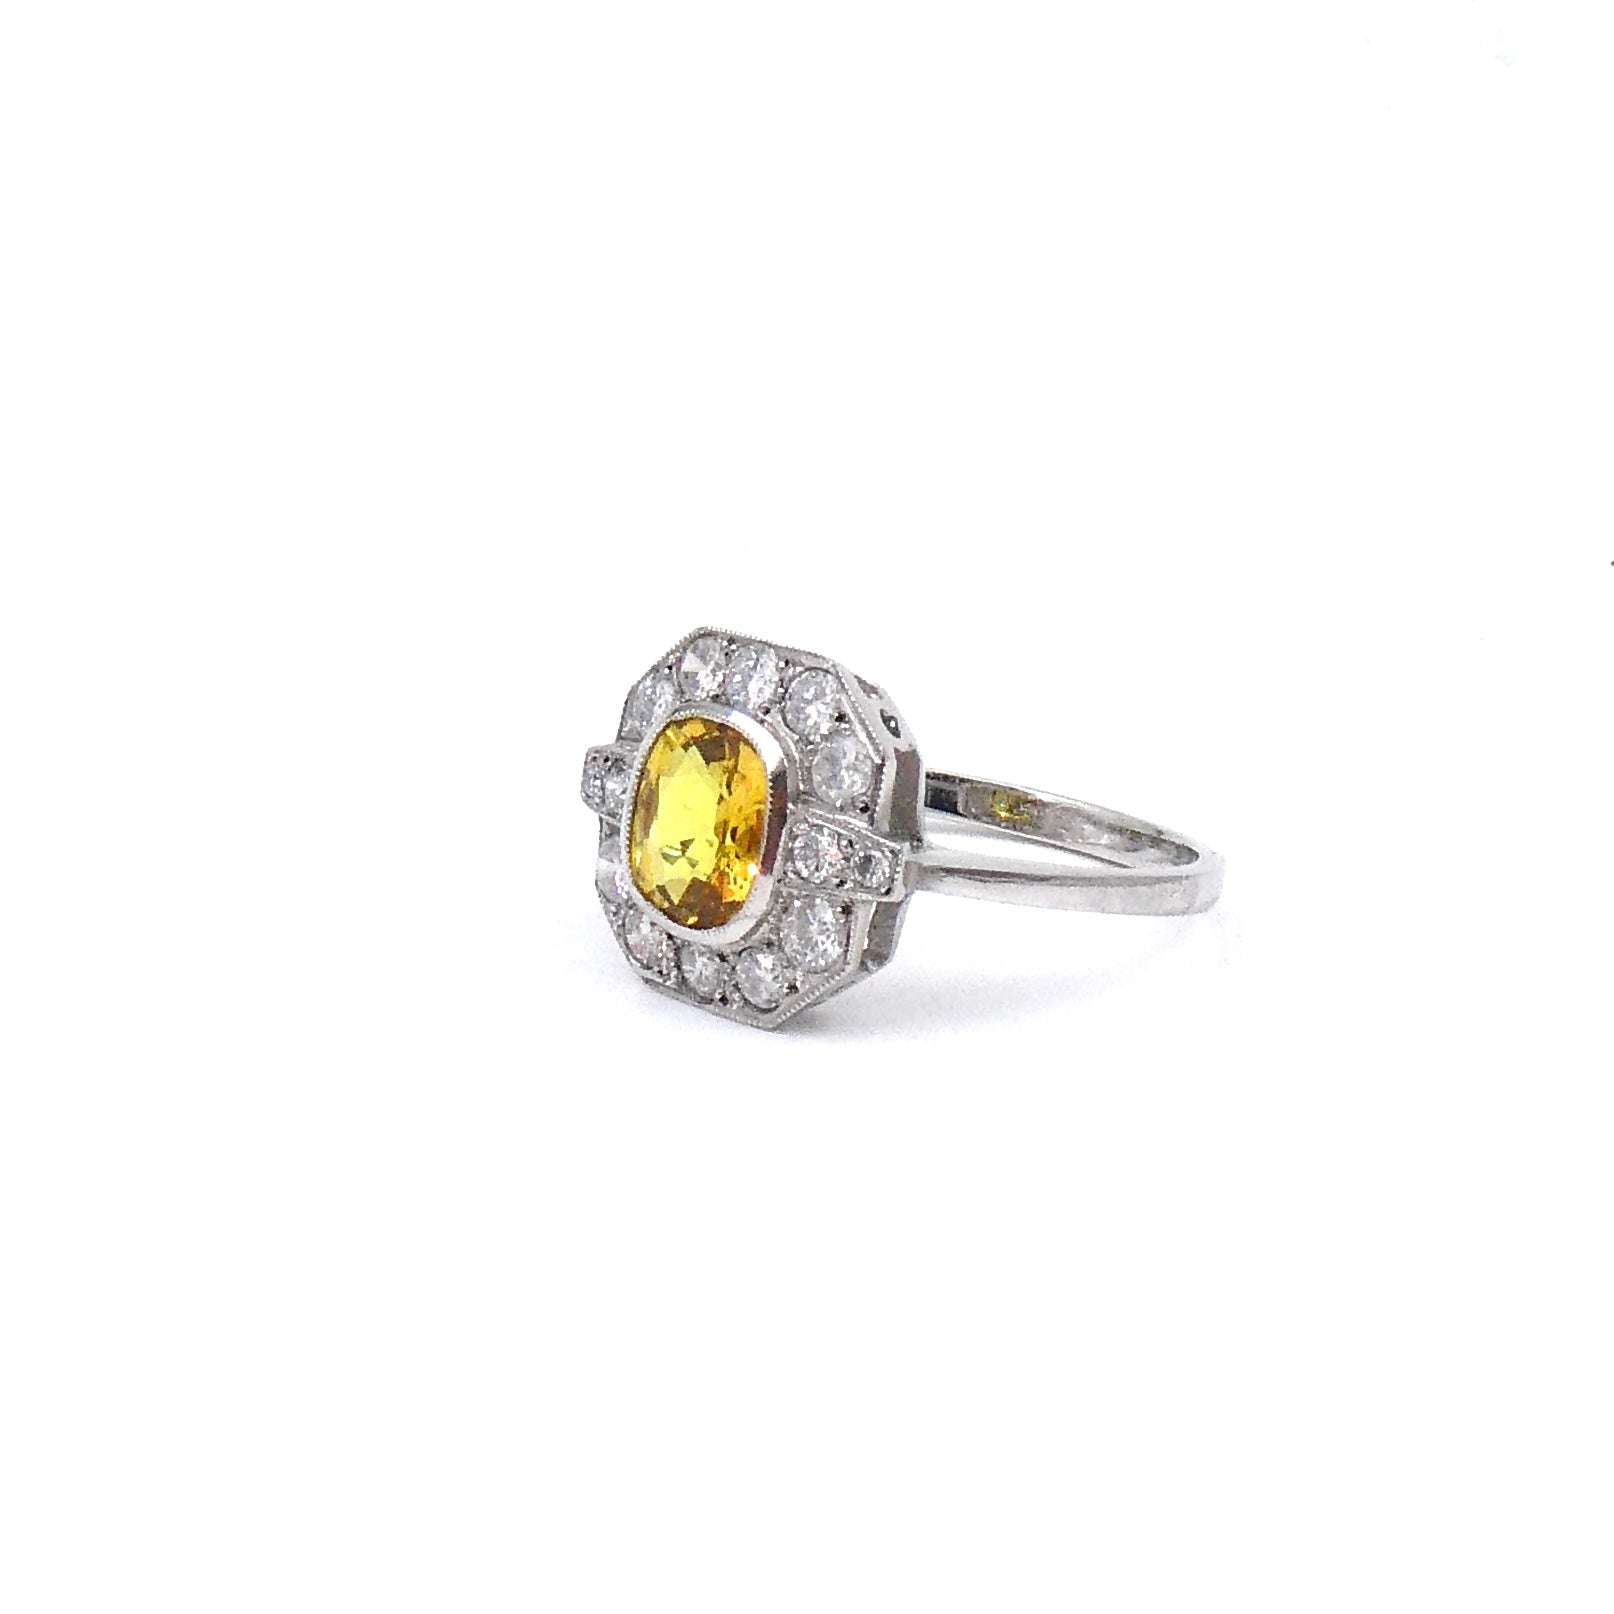 An art deco style yellow sapphire and diamond ring. - Collected